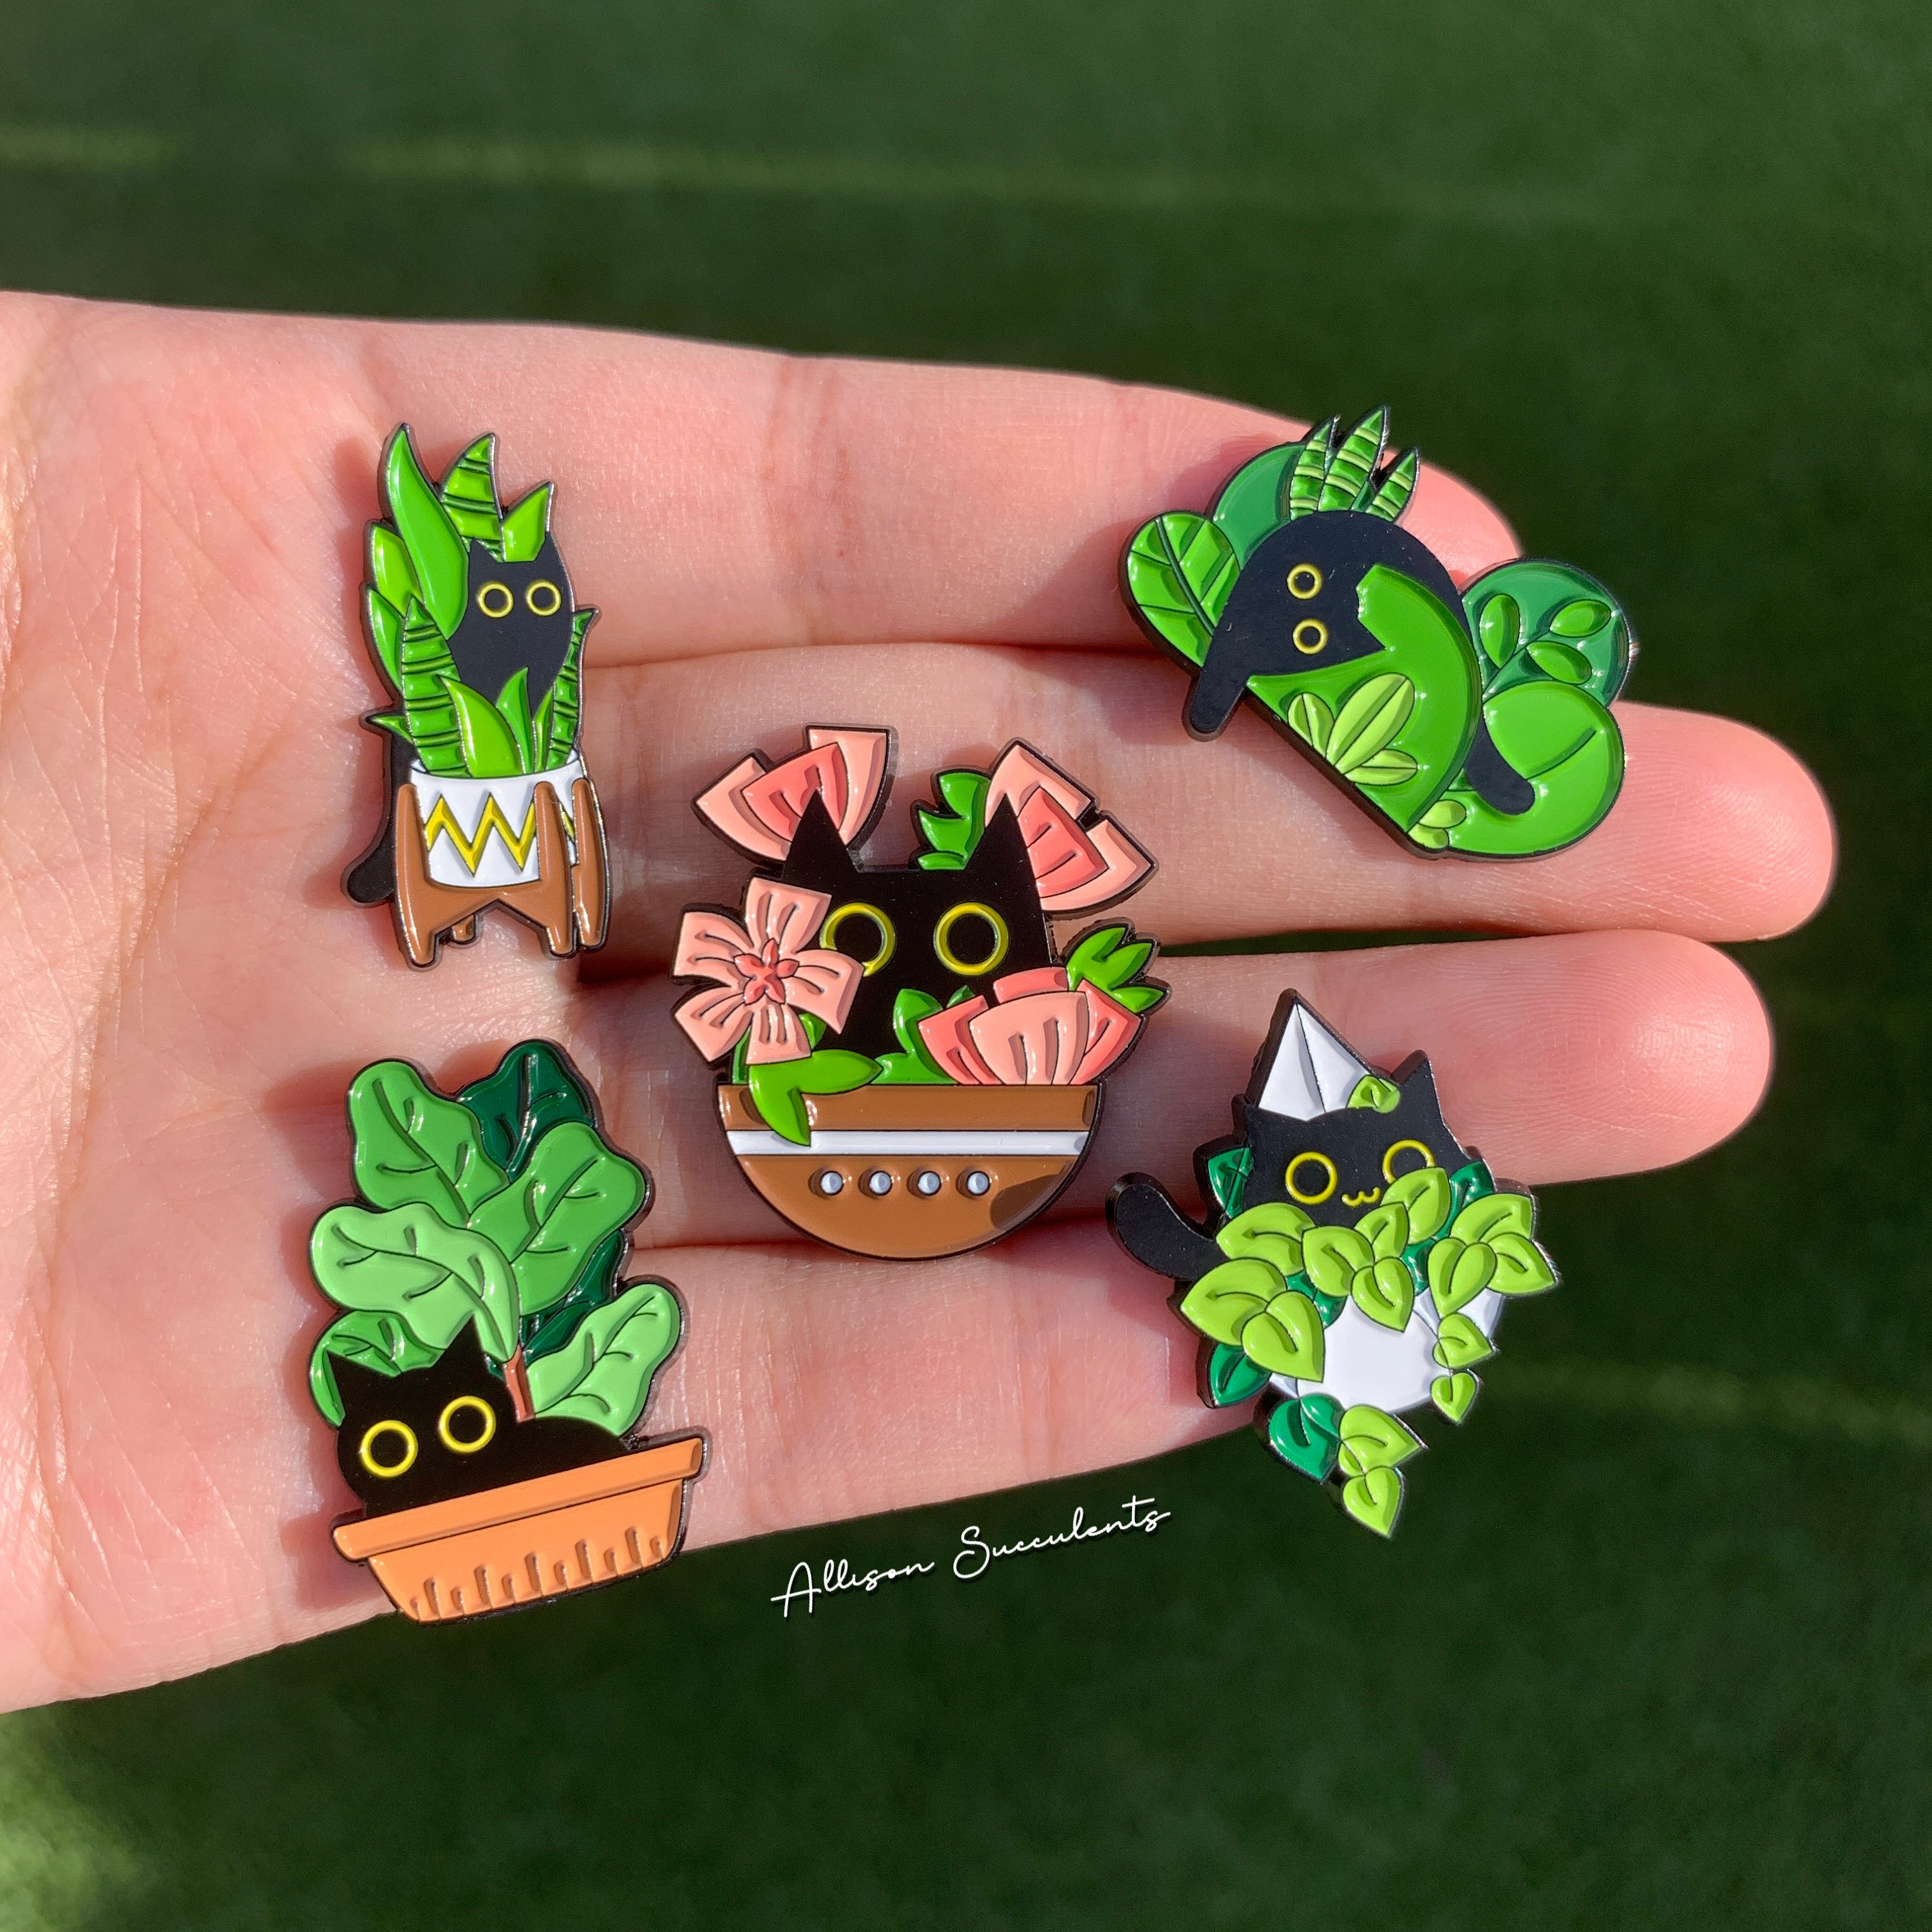  3pcs Cartoon Plant Enamel Lapel Pins Cute Creative Succulents  Potted Brooch Aloe Leaf Alloy Plant Badge Pin Brooch for Women Clothing  Bags Backpacks Jackets Hat DIY Accessory Decoration : Arts, Crafts